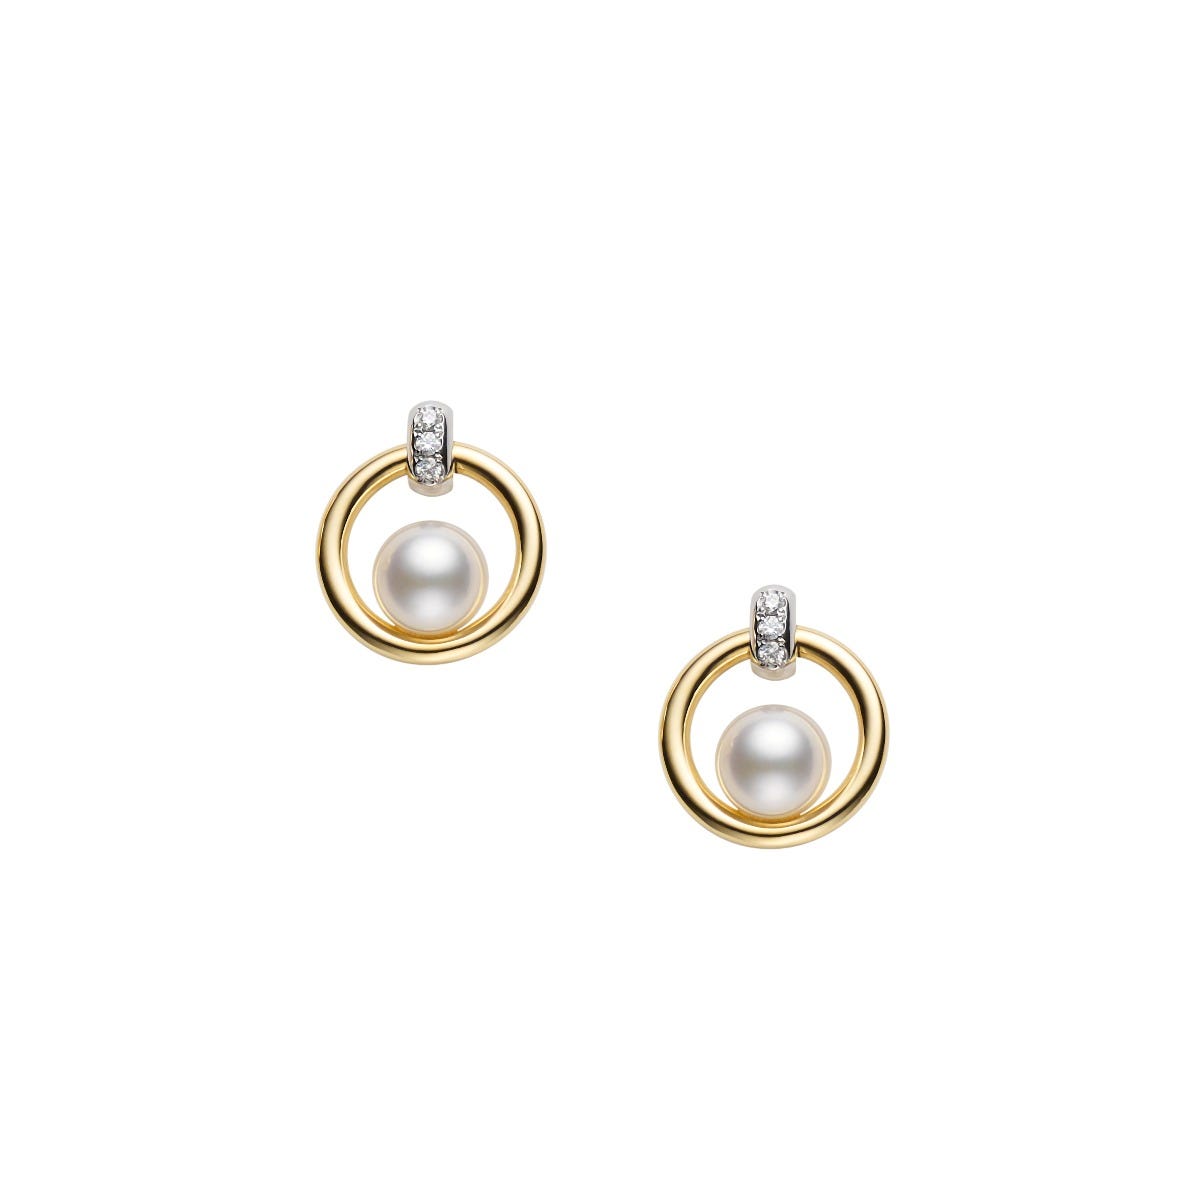 Mikimoto 18K Yellow Gold And 18K White Gold Rhodium Plated Circle Pearl Stud Earrings With Diamonds